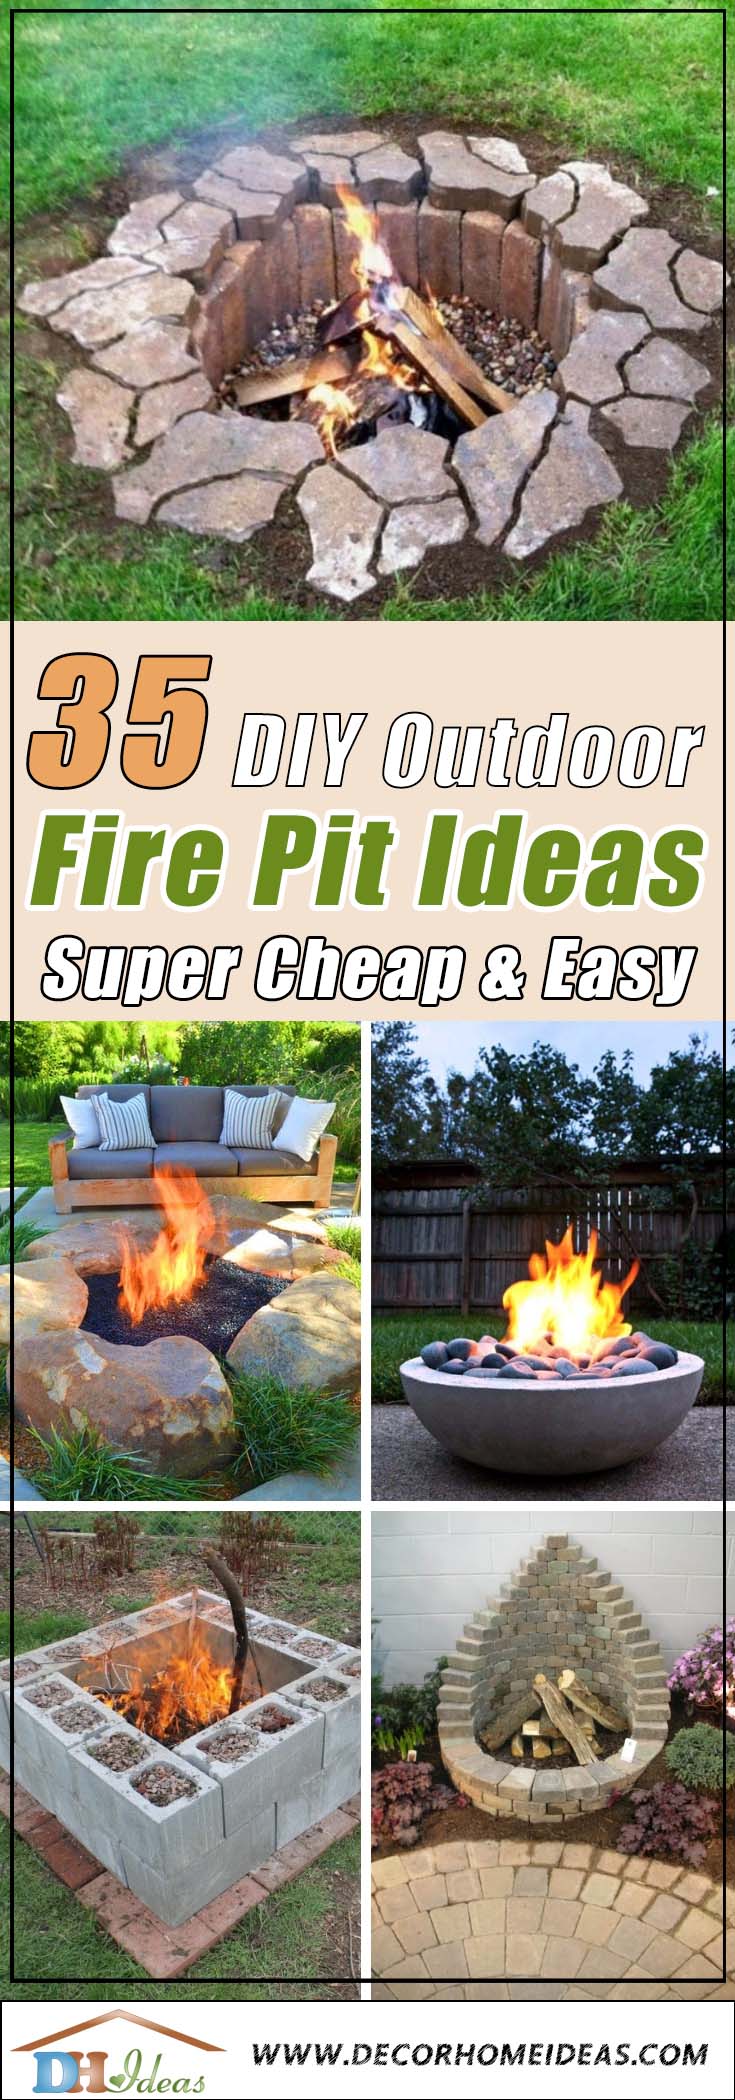 35 Easy To Do Fire Pit Ideas And, How To Build An Easy Fire Pit